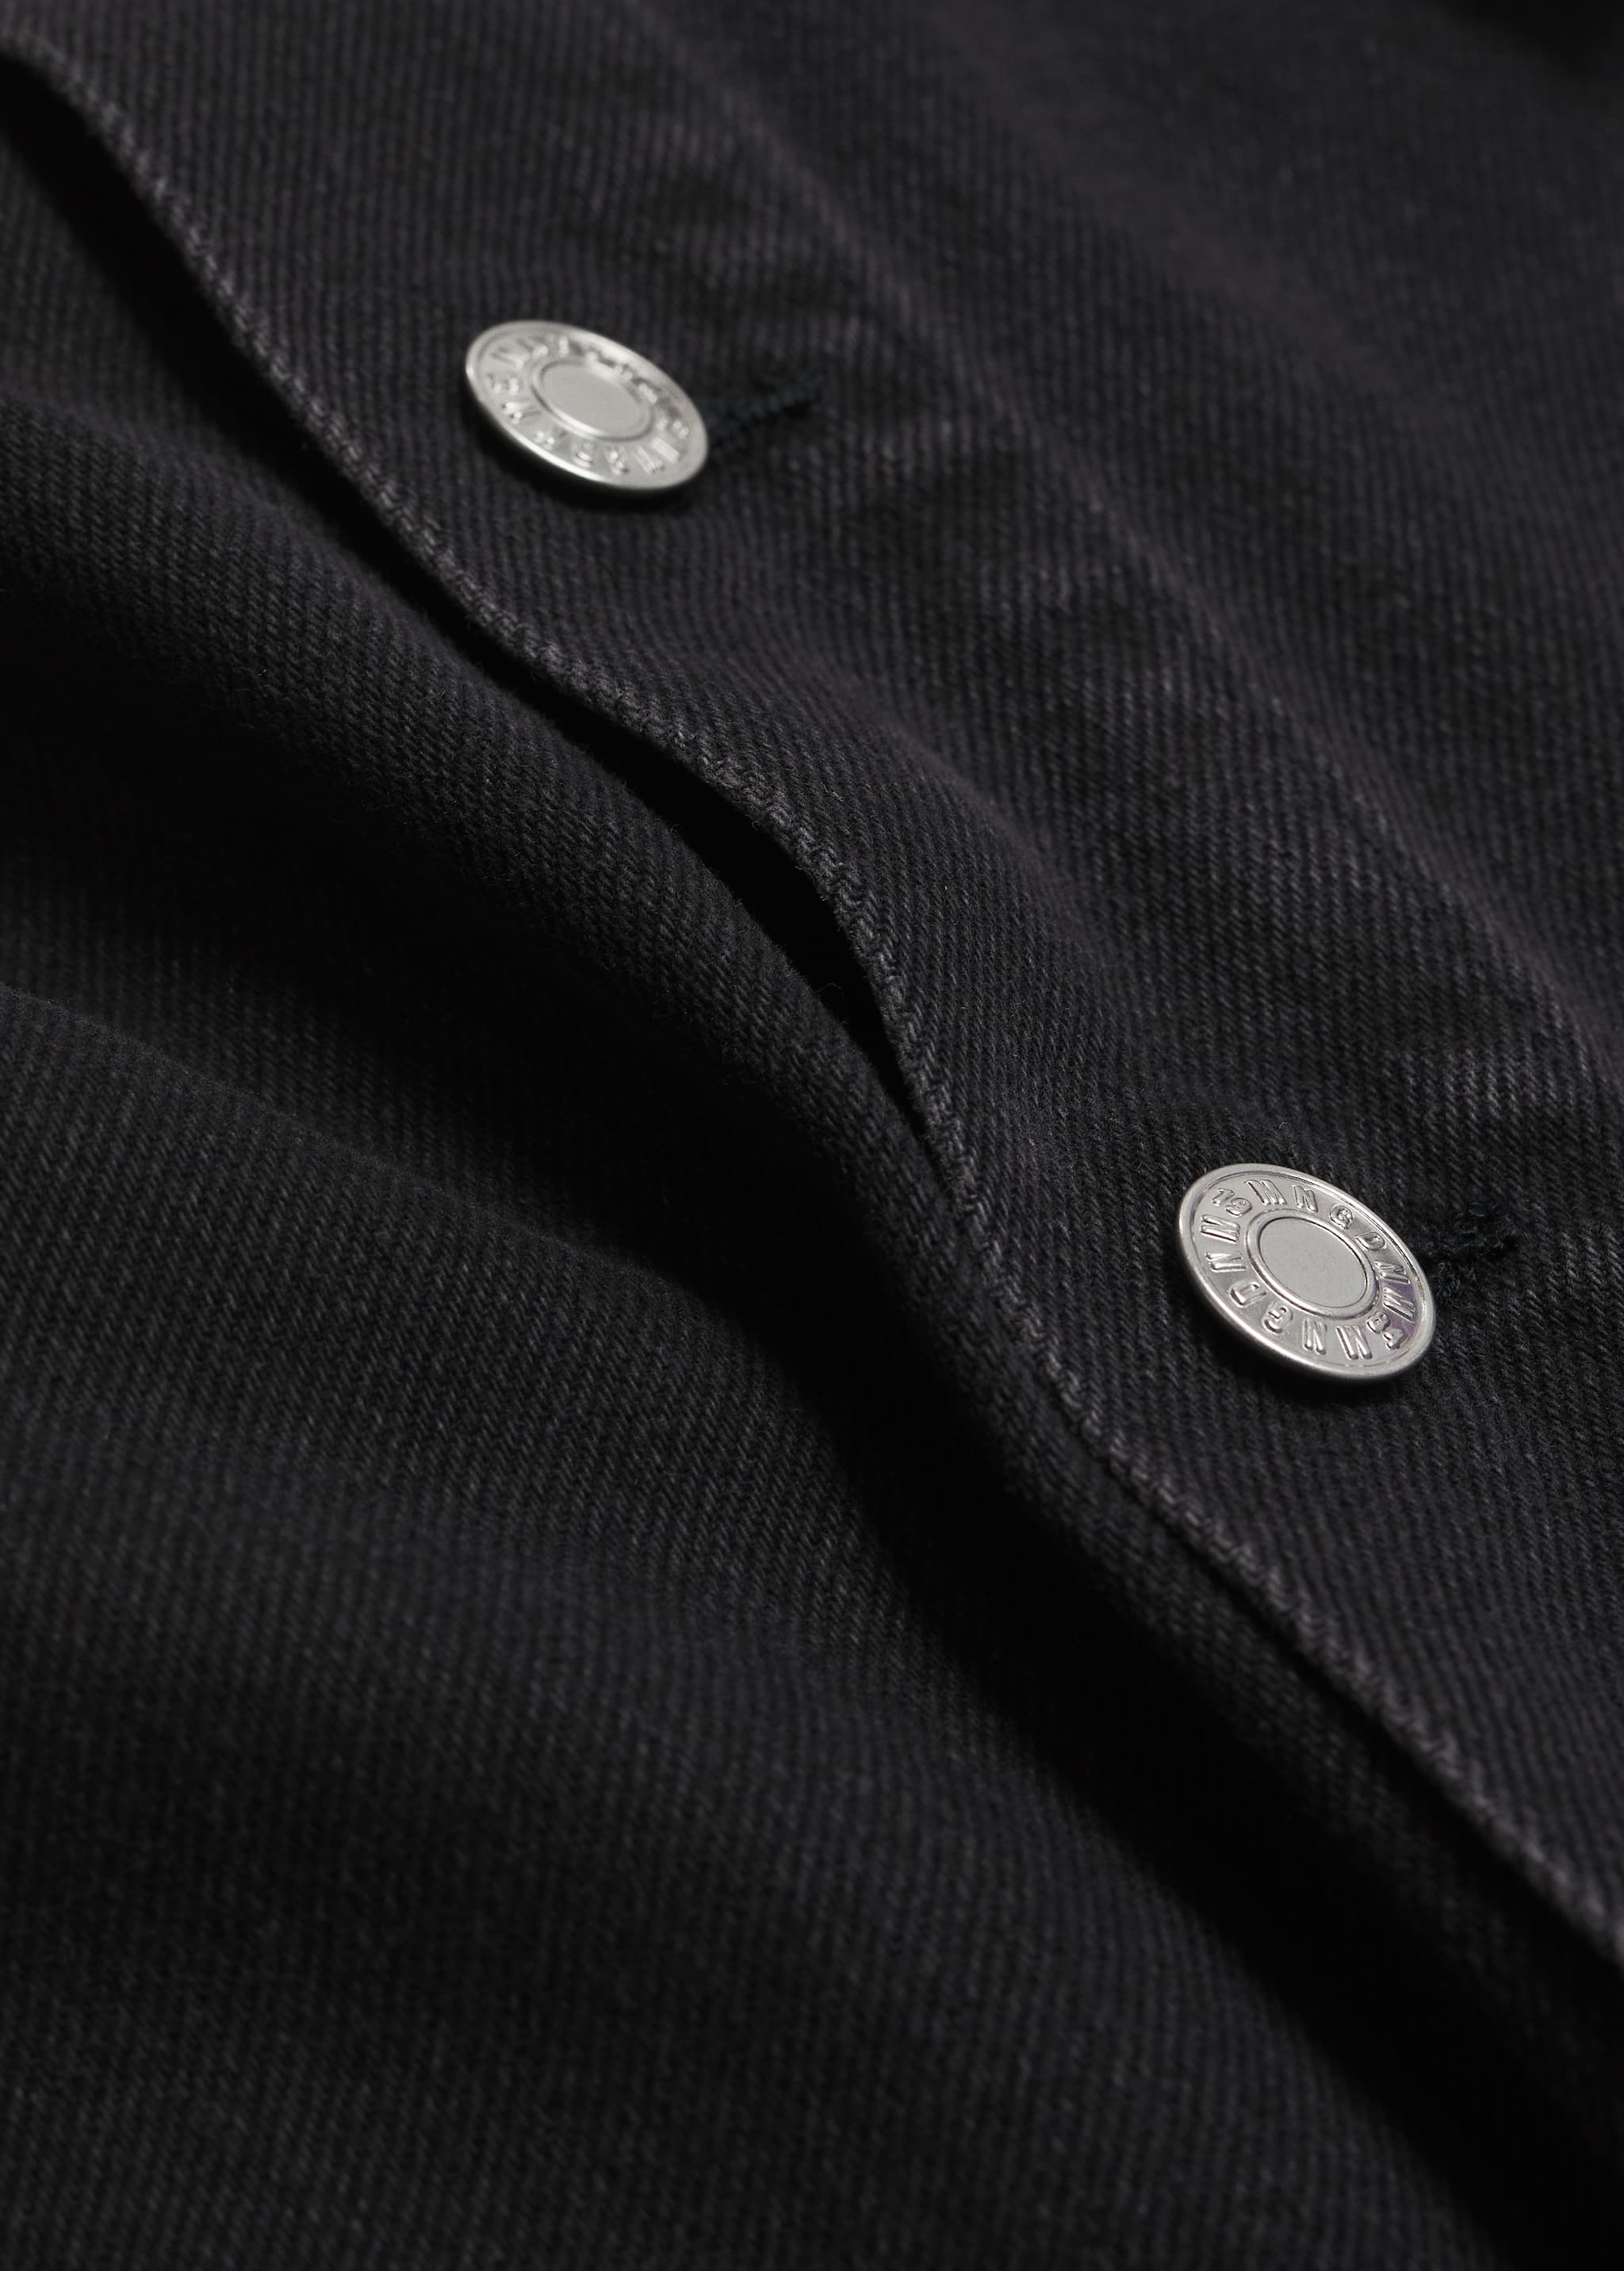 Lined denim dungarees - Details of the article 8